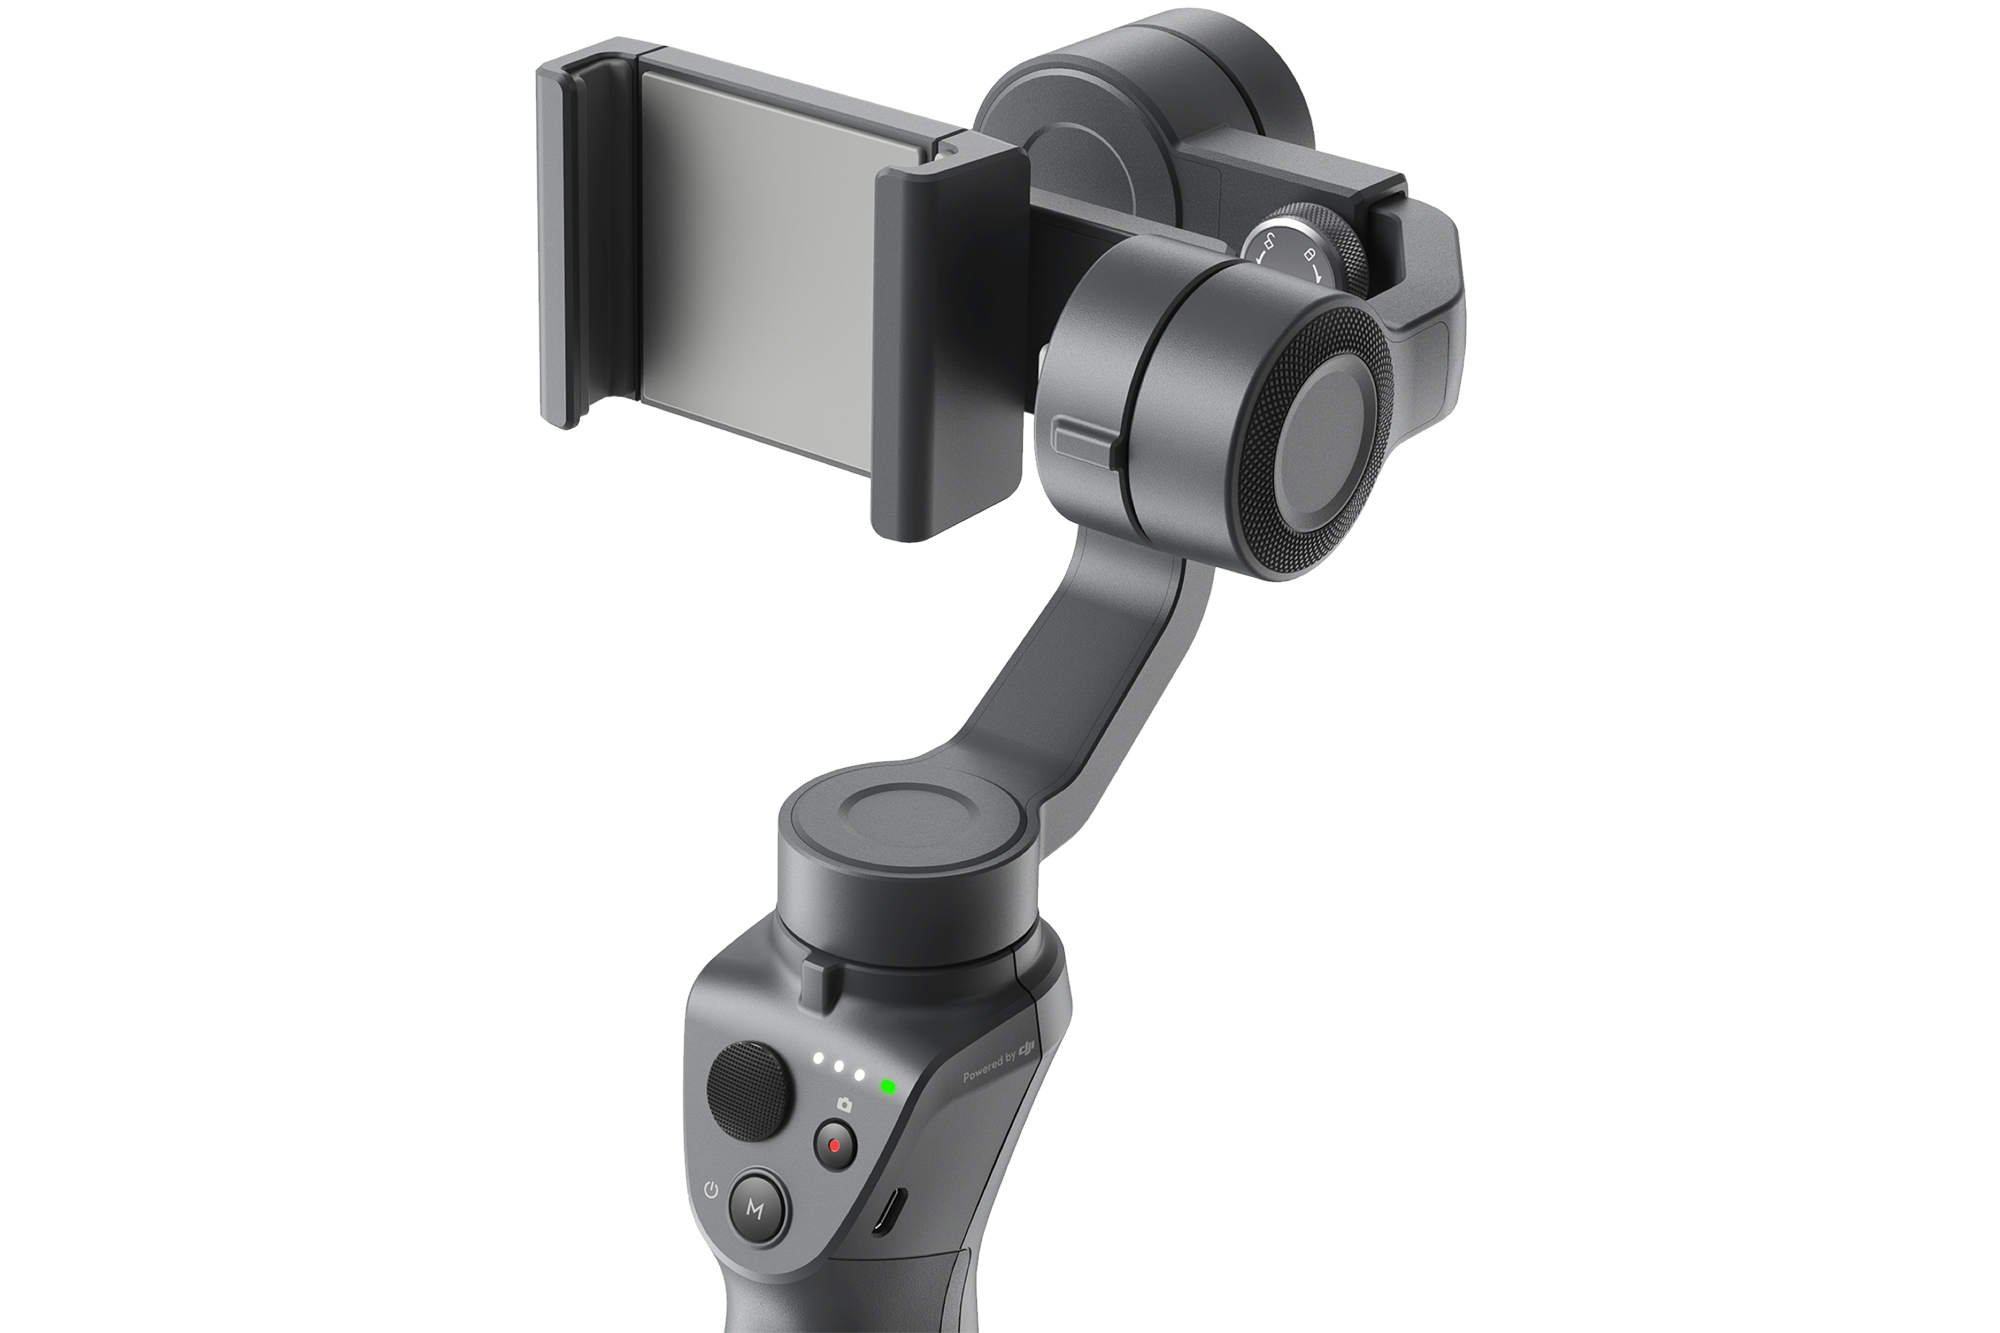 Download Mov From Dji Osmo To Mac